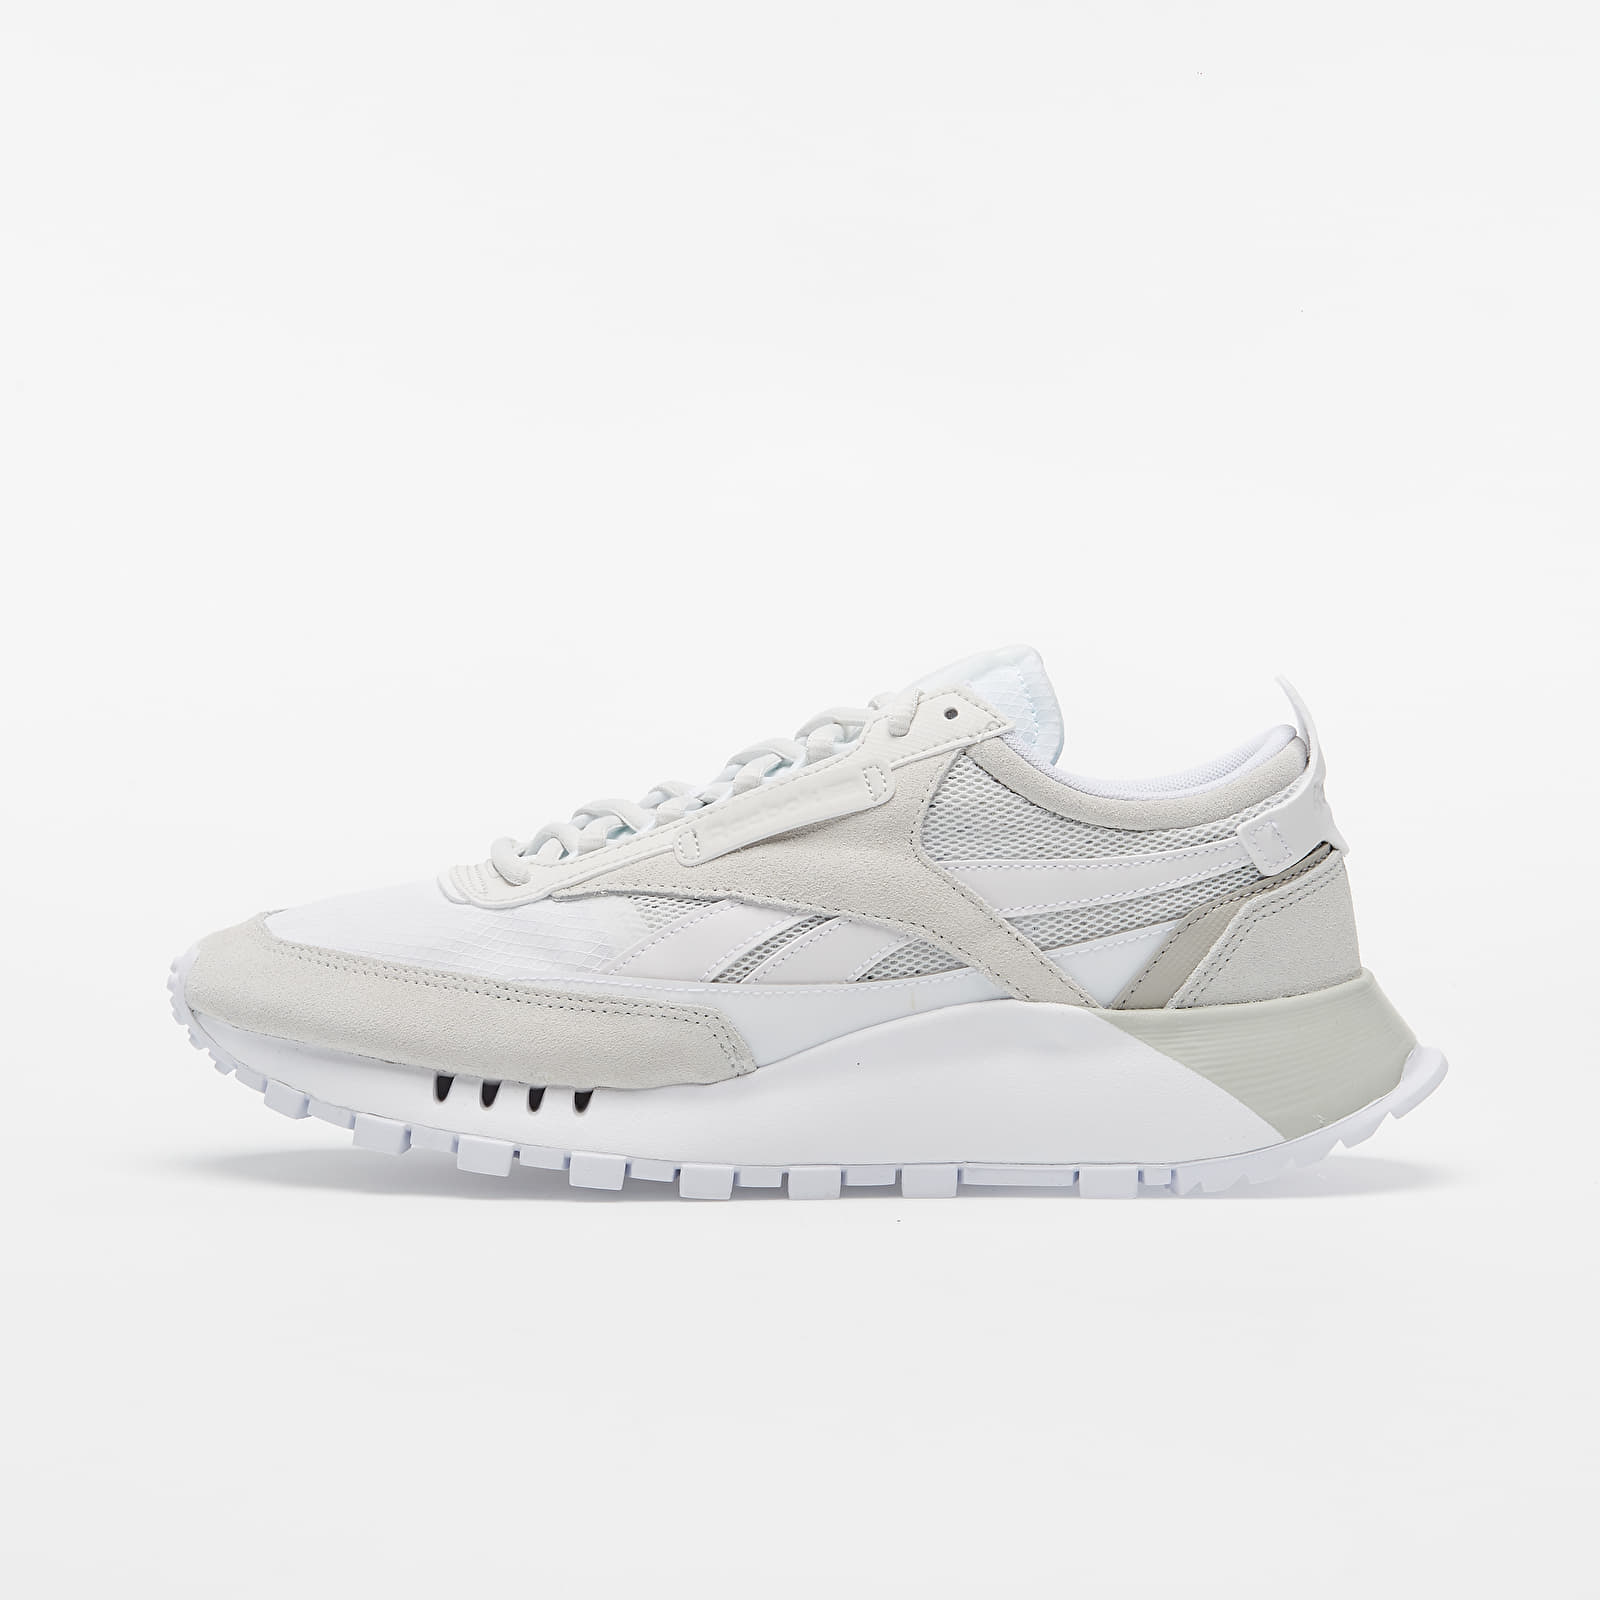 Reebok Classic Legacy White/ Trace Grey 1/ Skugry FY7379